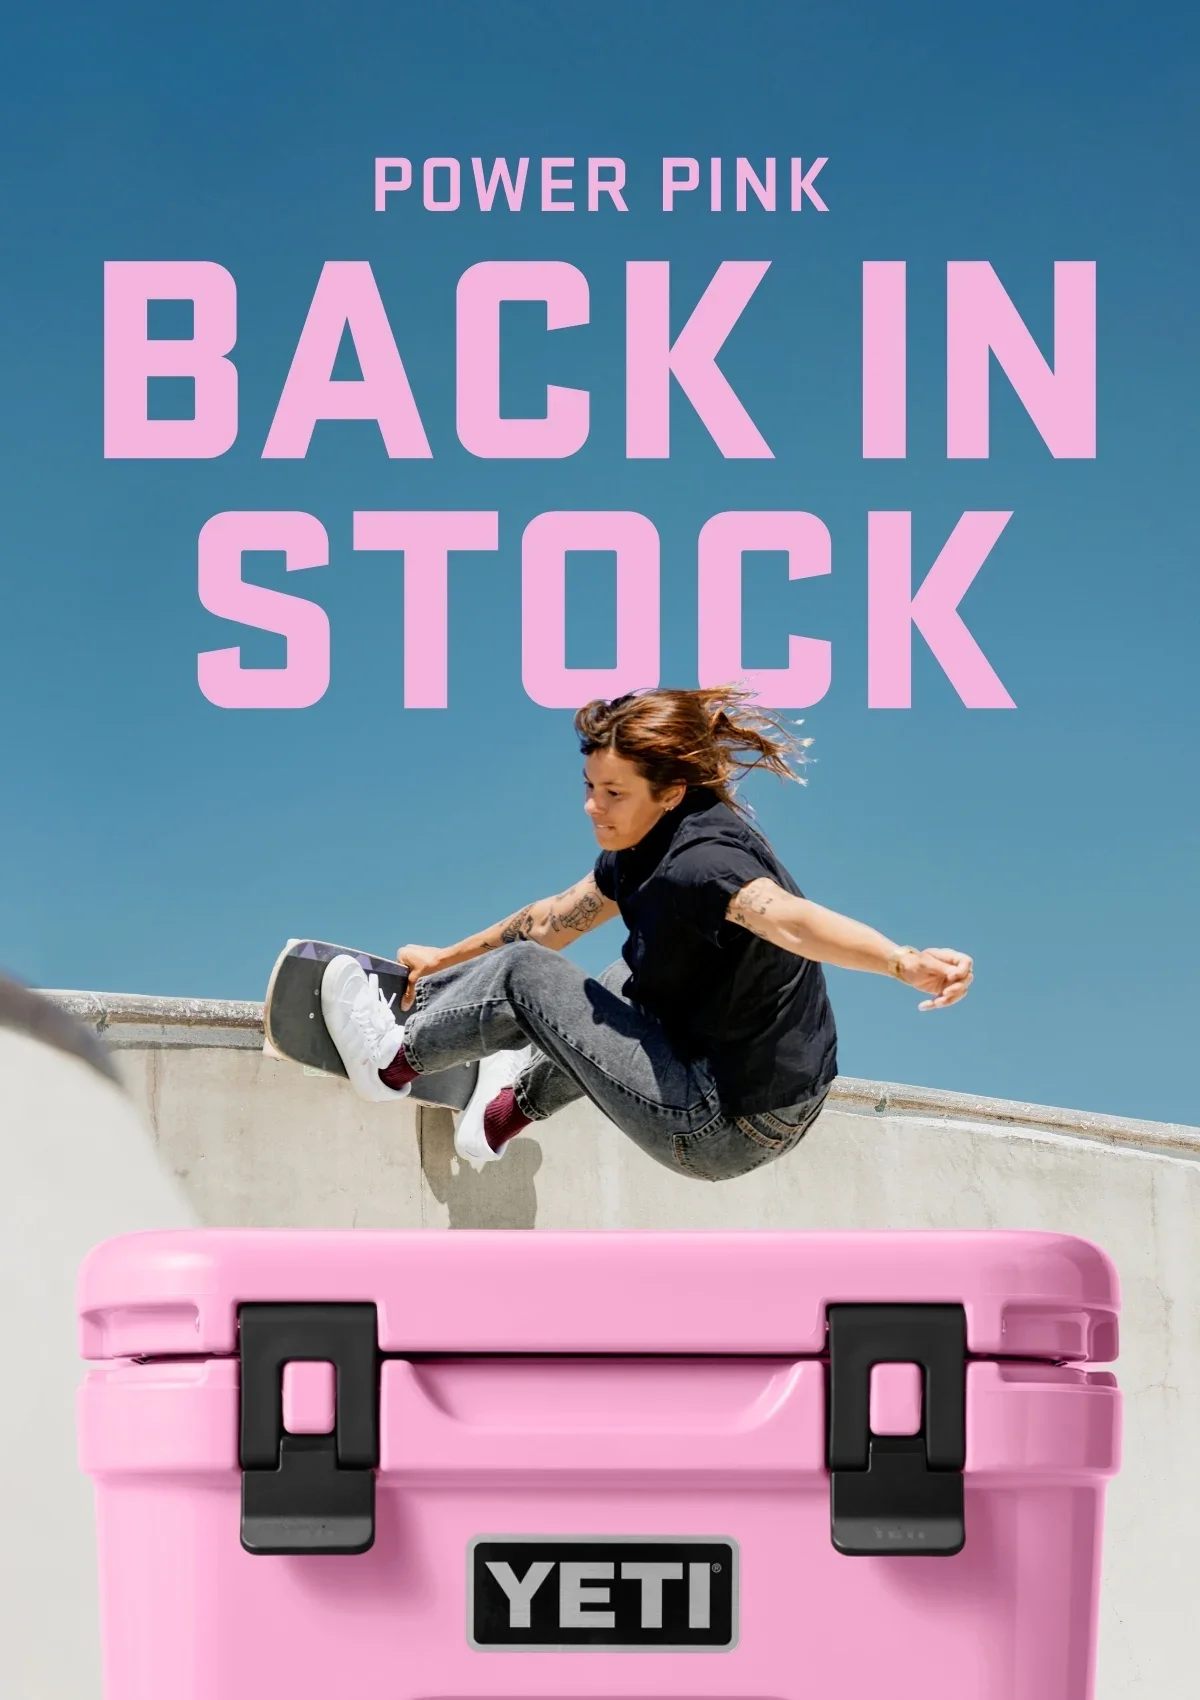 YETI - We put a new pink on the map this fall. Introducing the